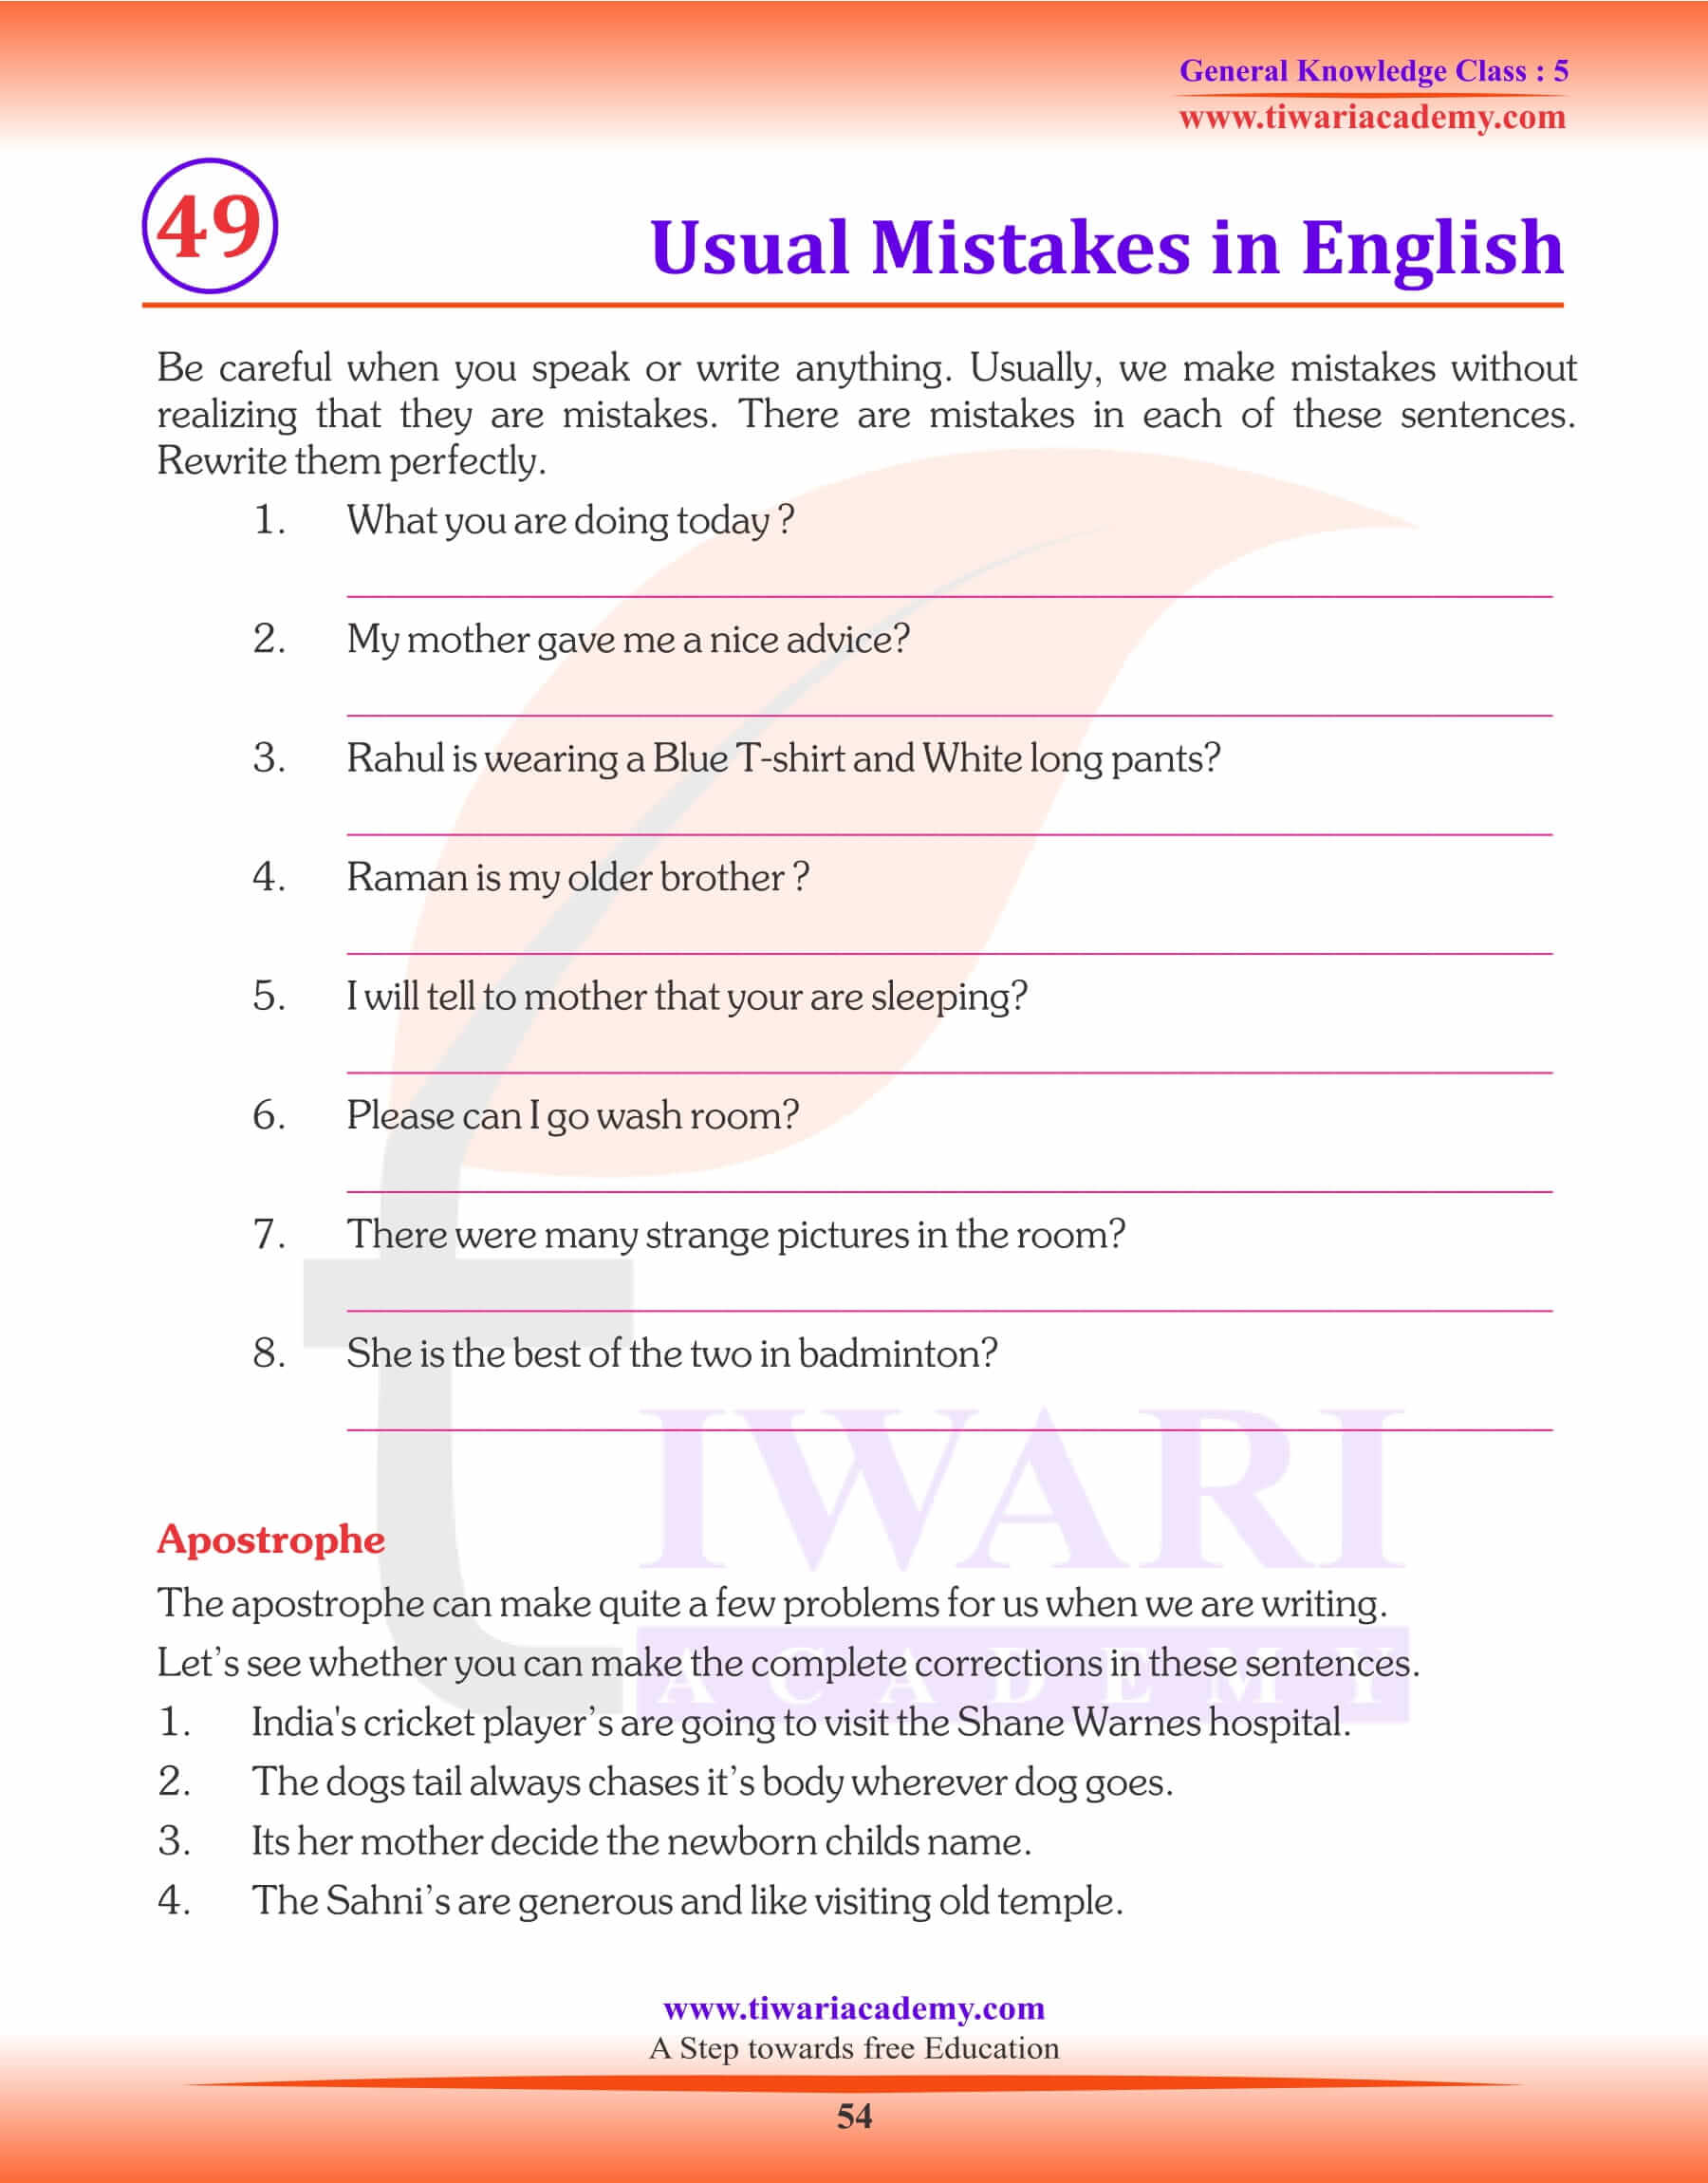 Usual mistakes in English